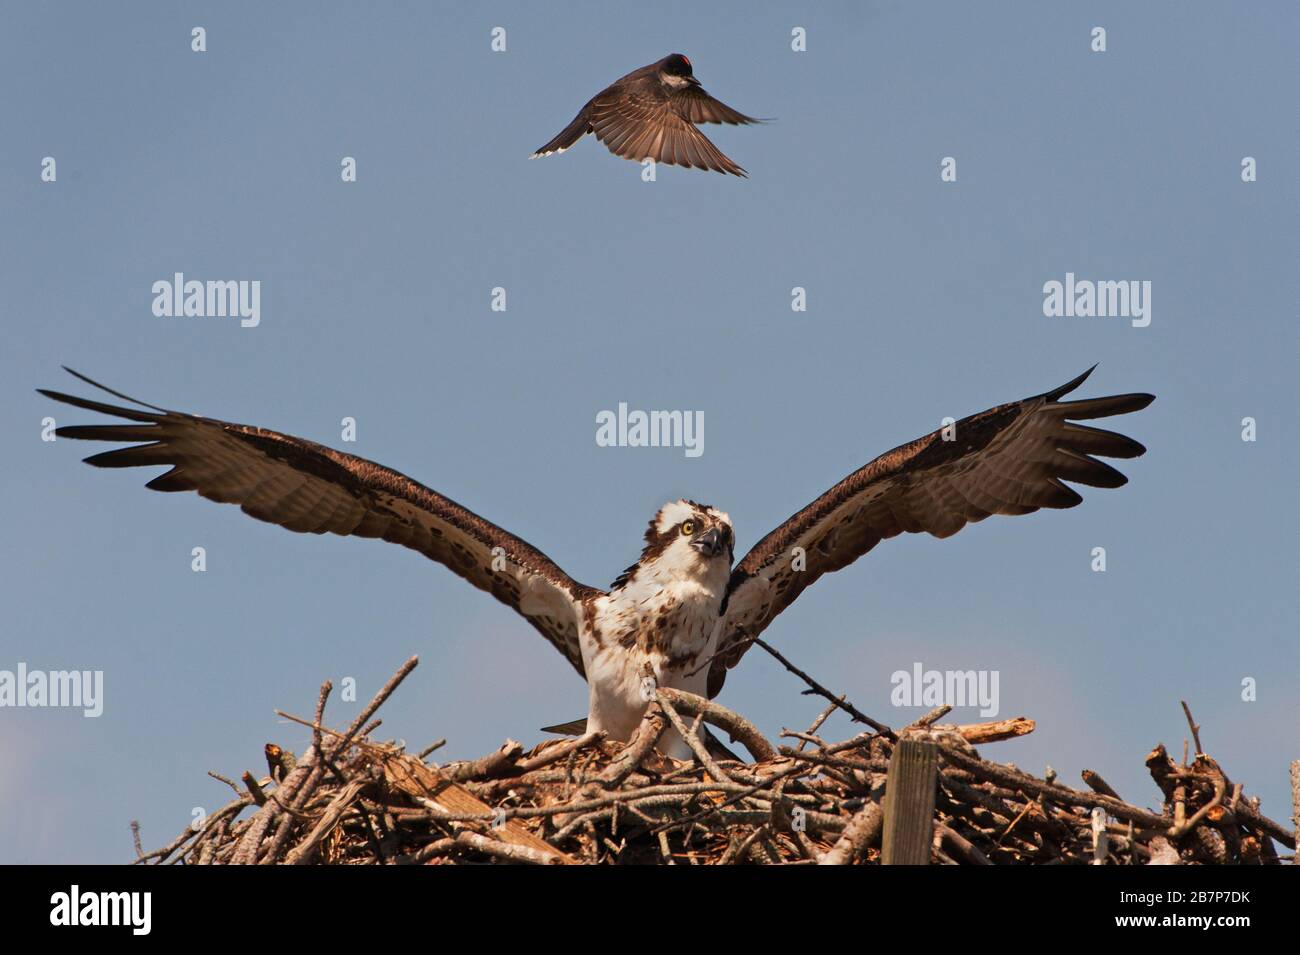 A small eastern kingbird attacking a much larger nesting osprey ...